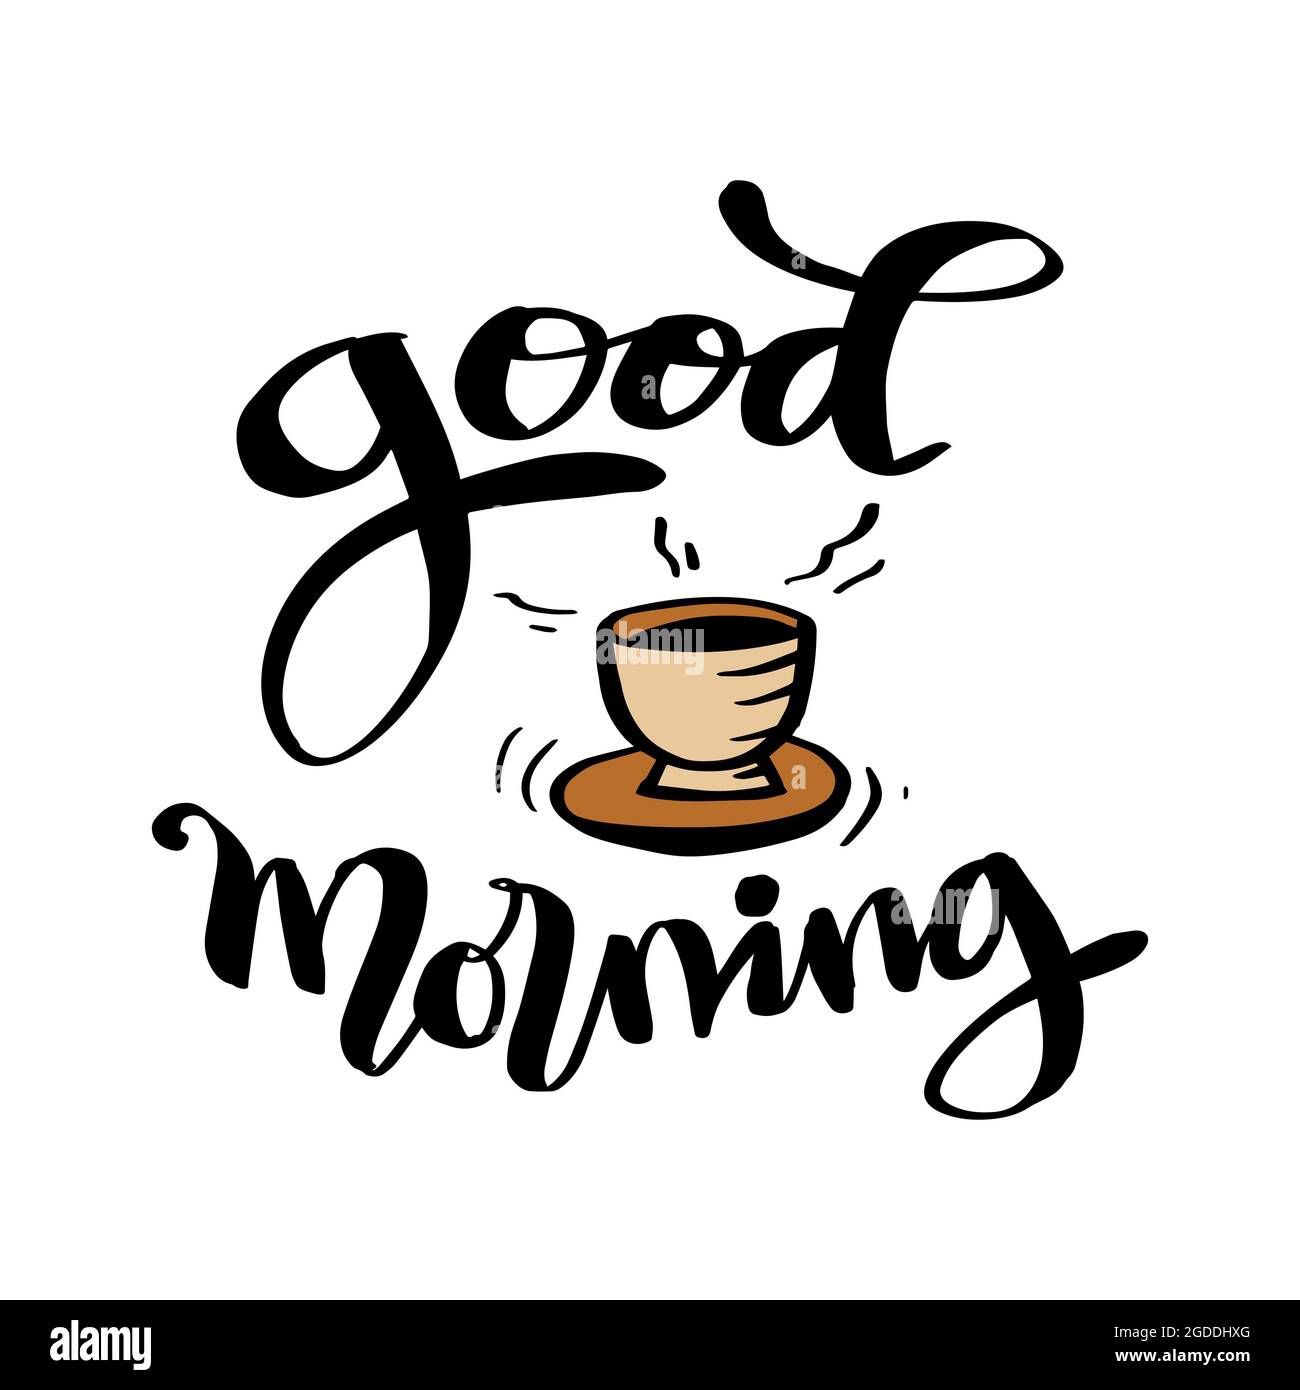 Good Morning lettering. Greeting card concept. Stock Photo